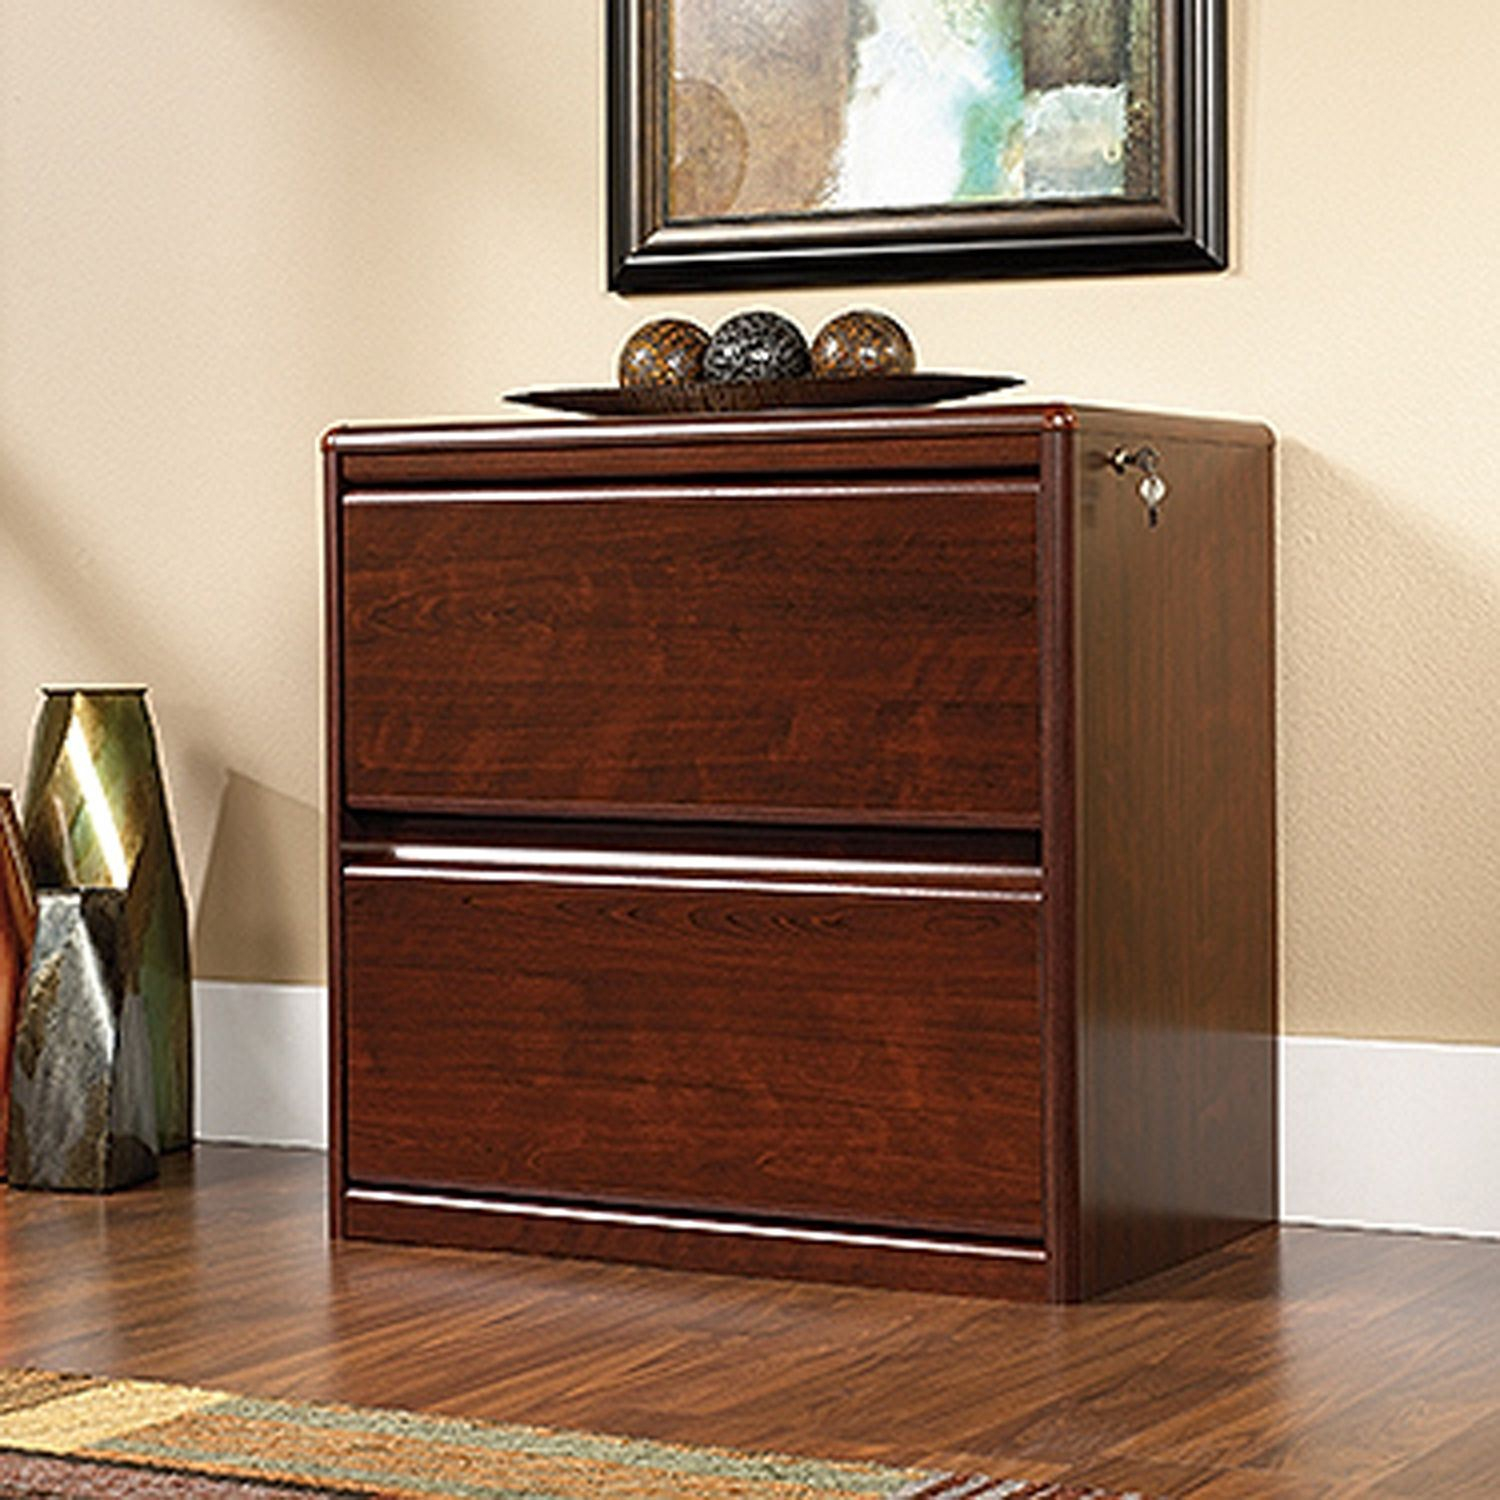 Cornerstone Lateral File Classic Cherry D 107302 Sauder throughout dimensions 1500 X 1500